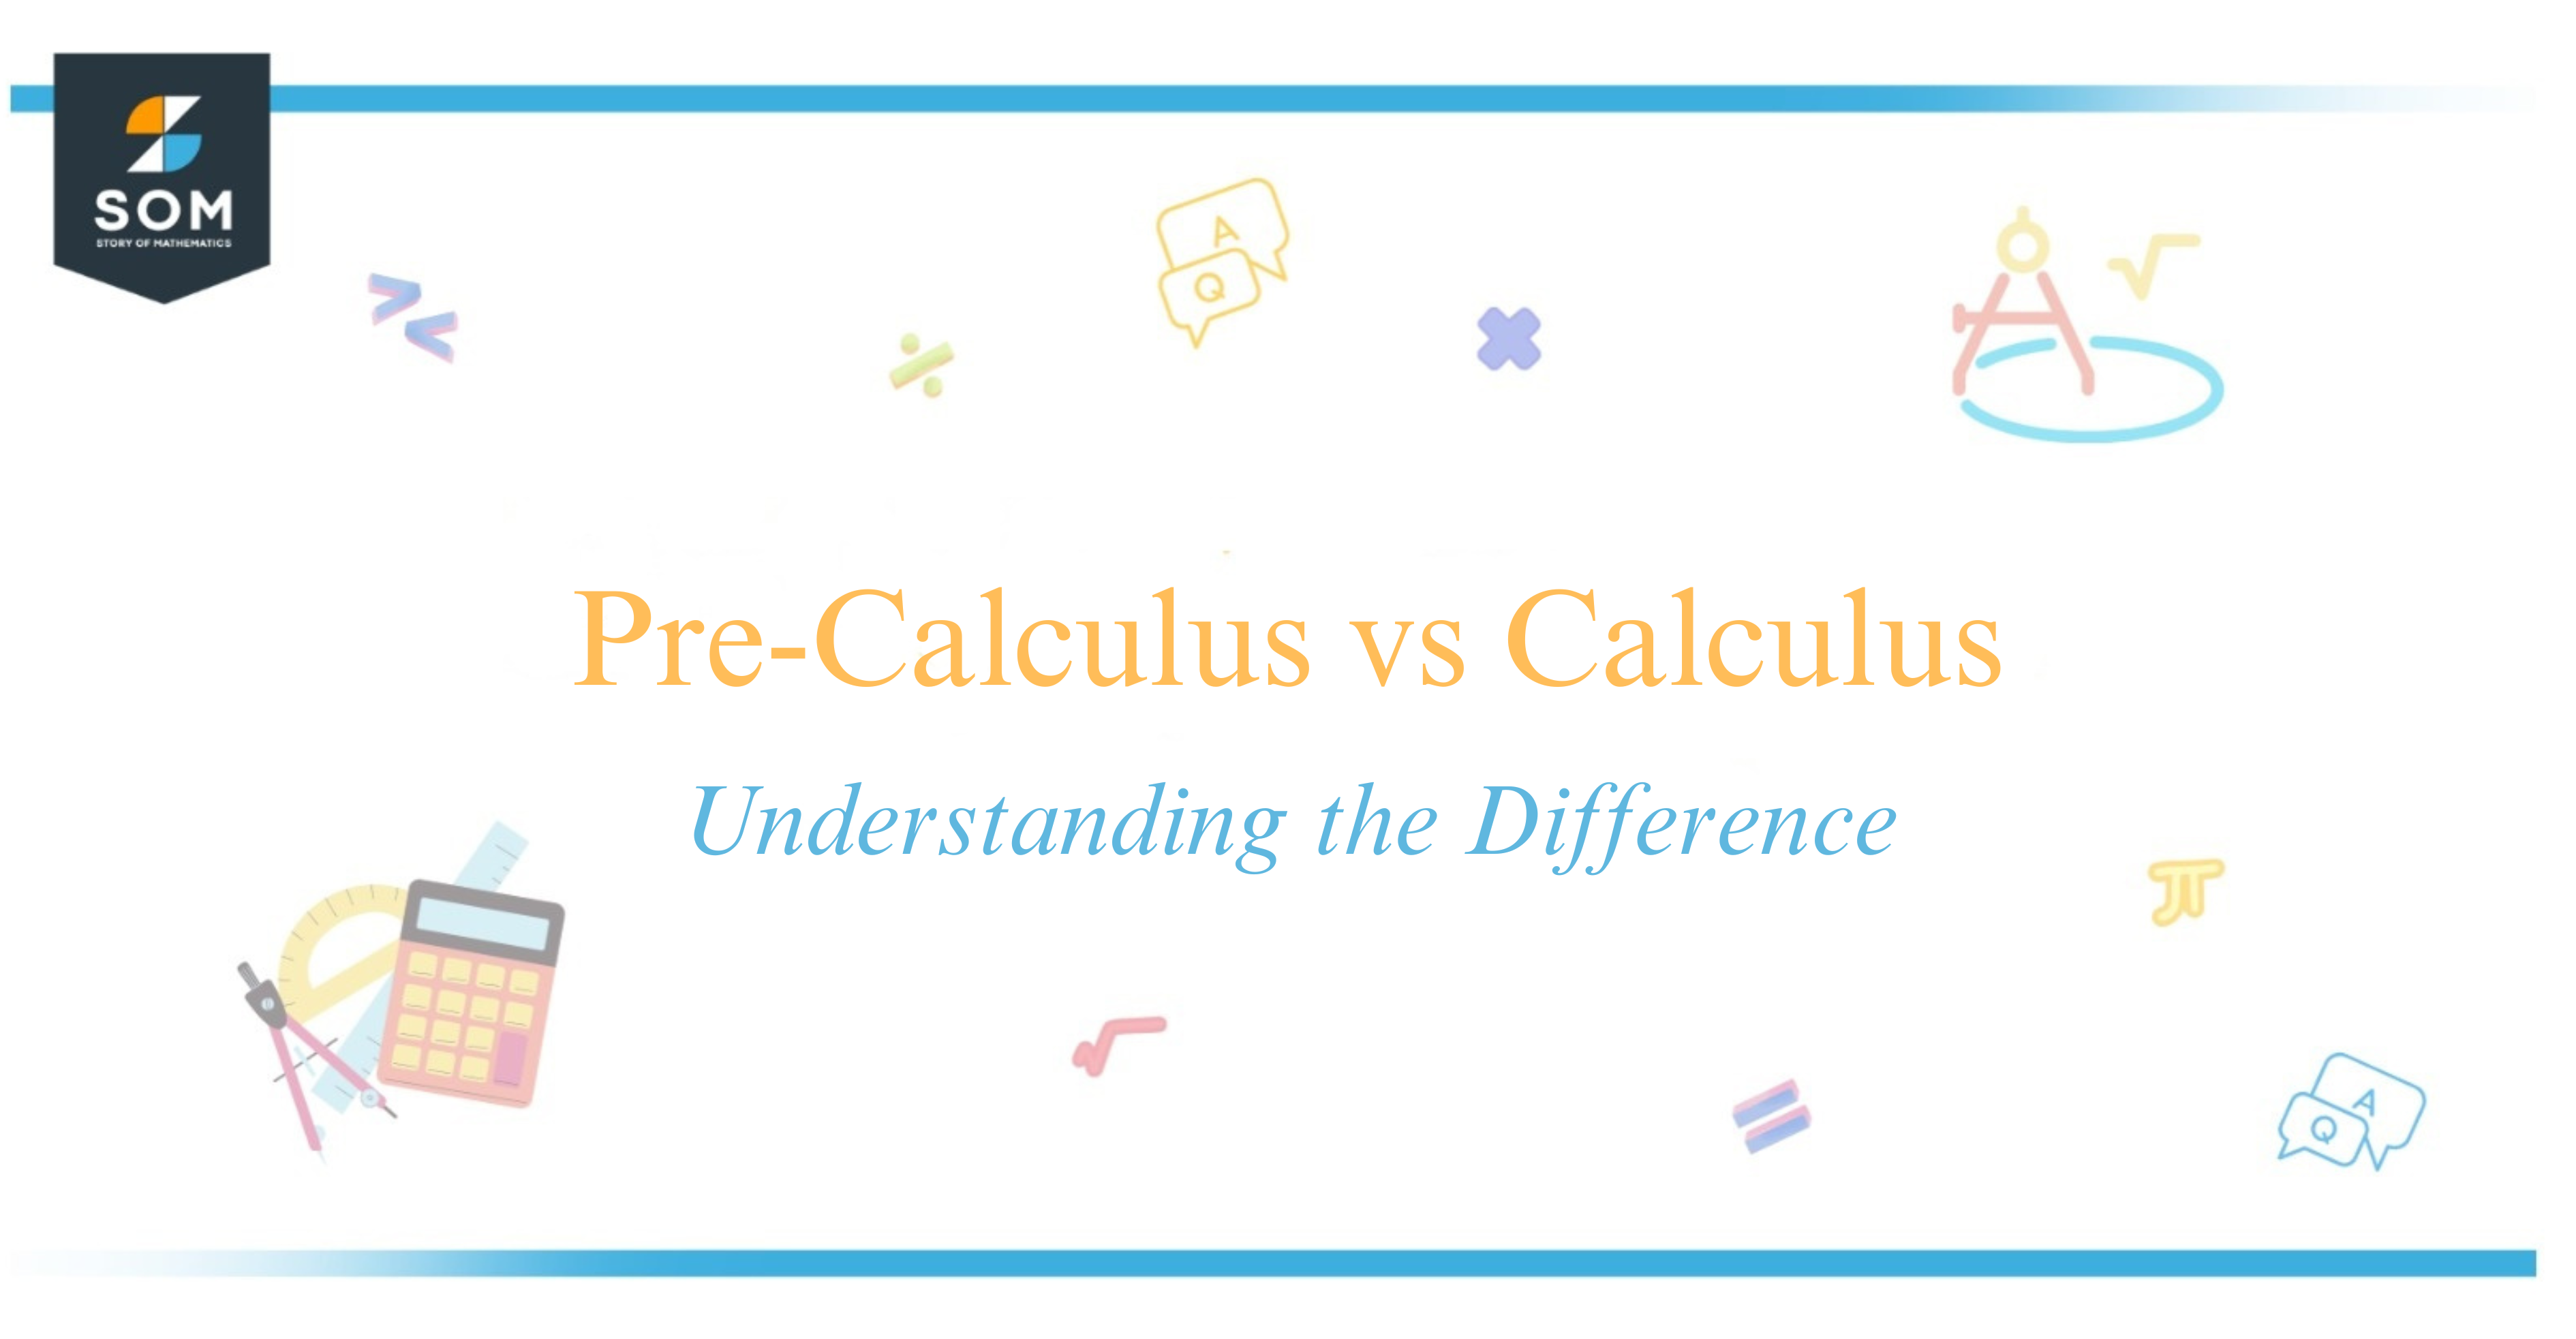 Pre-Calculus vs Calculus Understanding the Difference